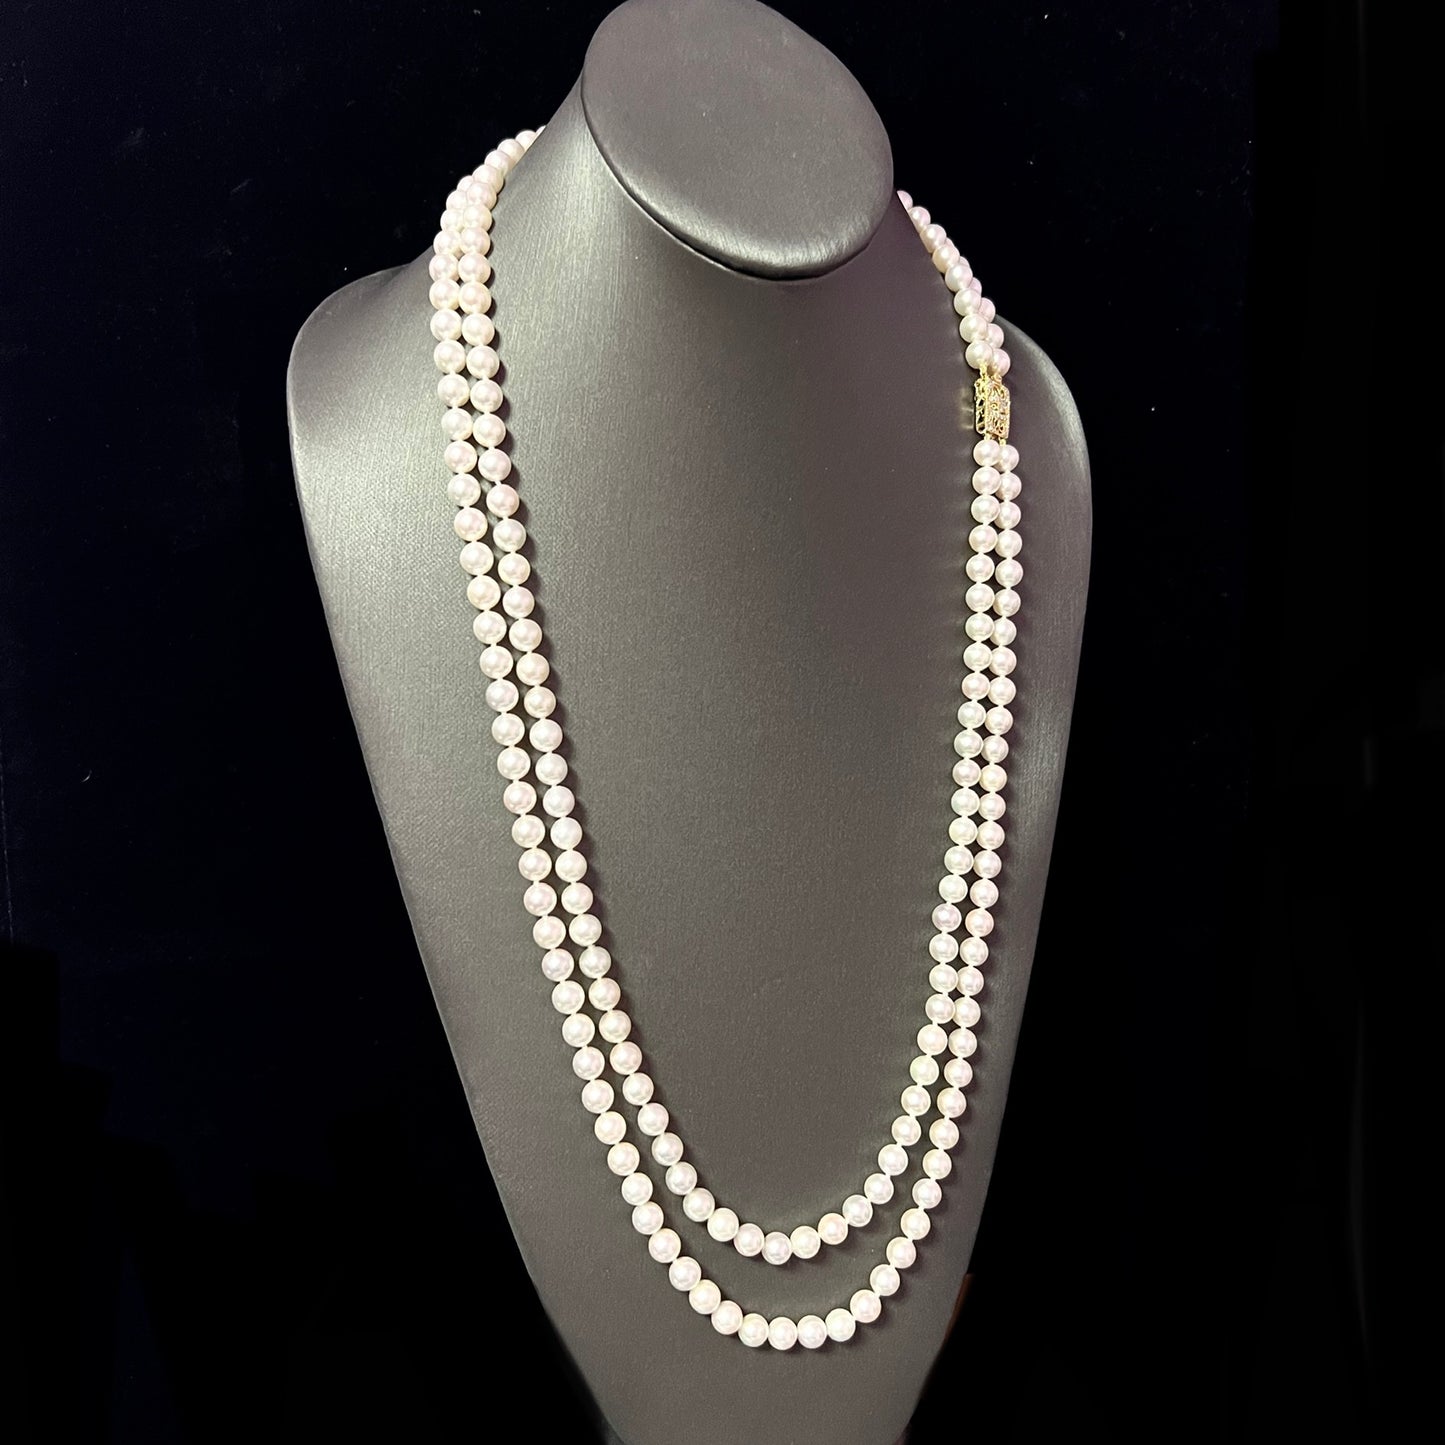 Akoya Pearl Diamond Double Stranded Necklace 28" 14k Y Gold 7.5 mm Certified $9,750 301764